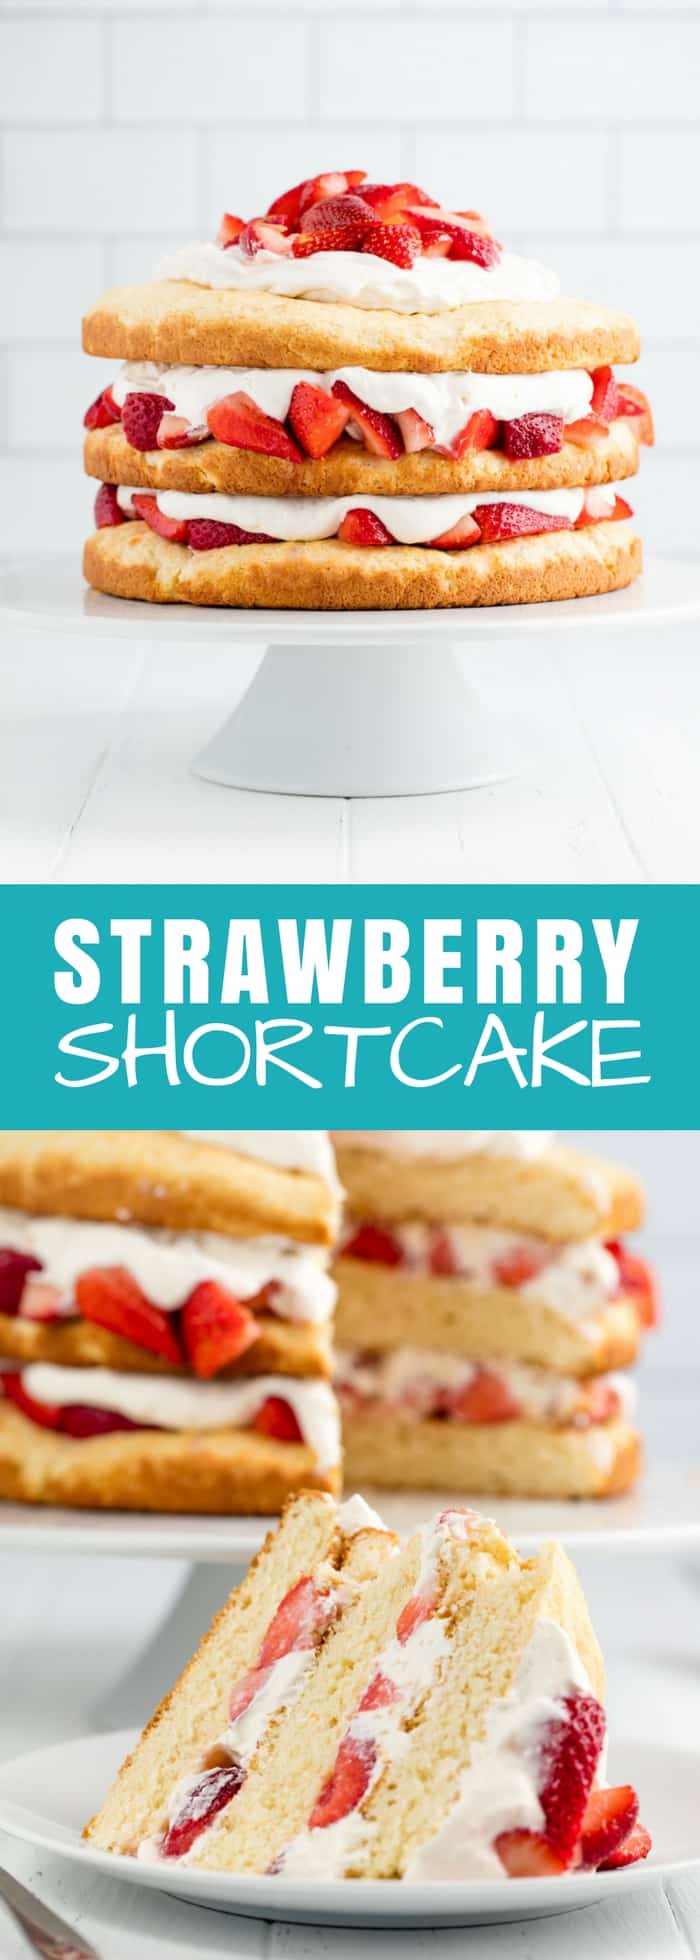 Strawberry Shortcake is a classic dessert that is perfect for spring and summer. This three layer strawberry dessert is not only beautiful, it's also delicious!